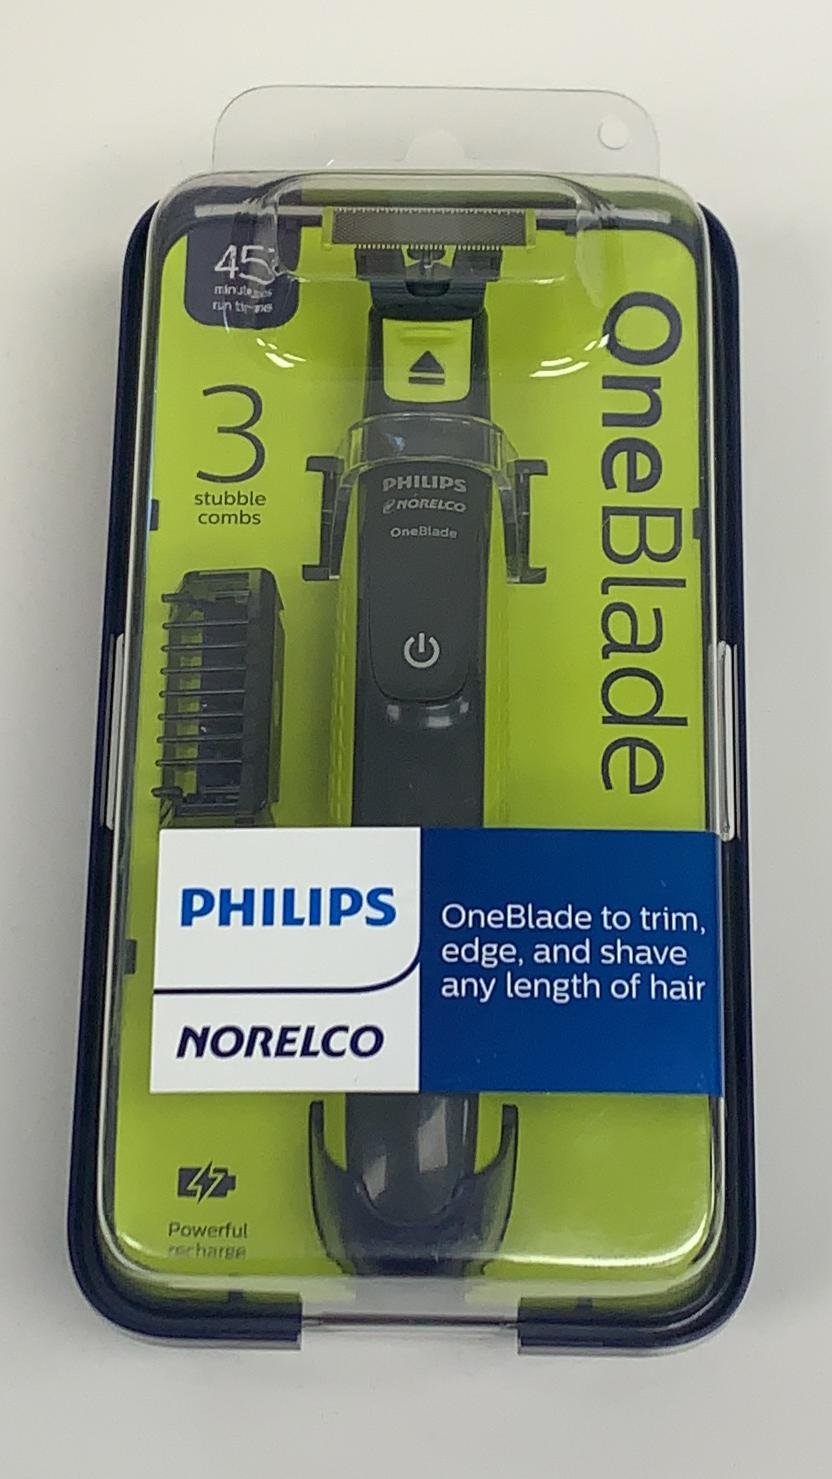 Philips Norelco OneBlade Electric Shaver - image 1 of 2